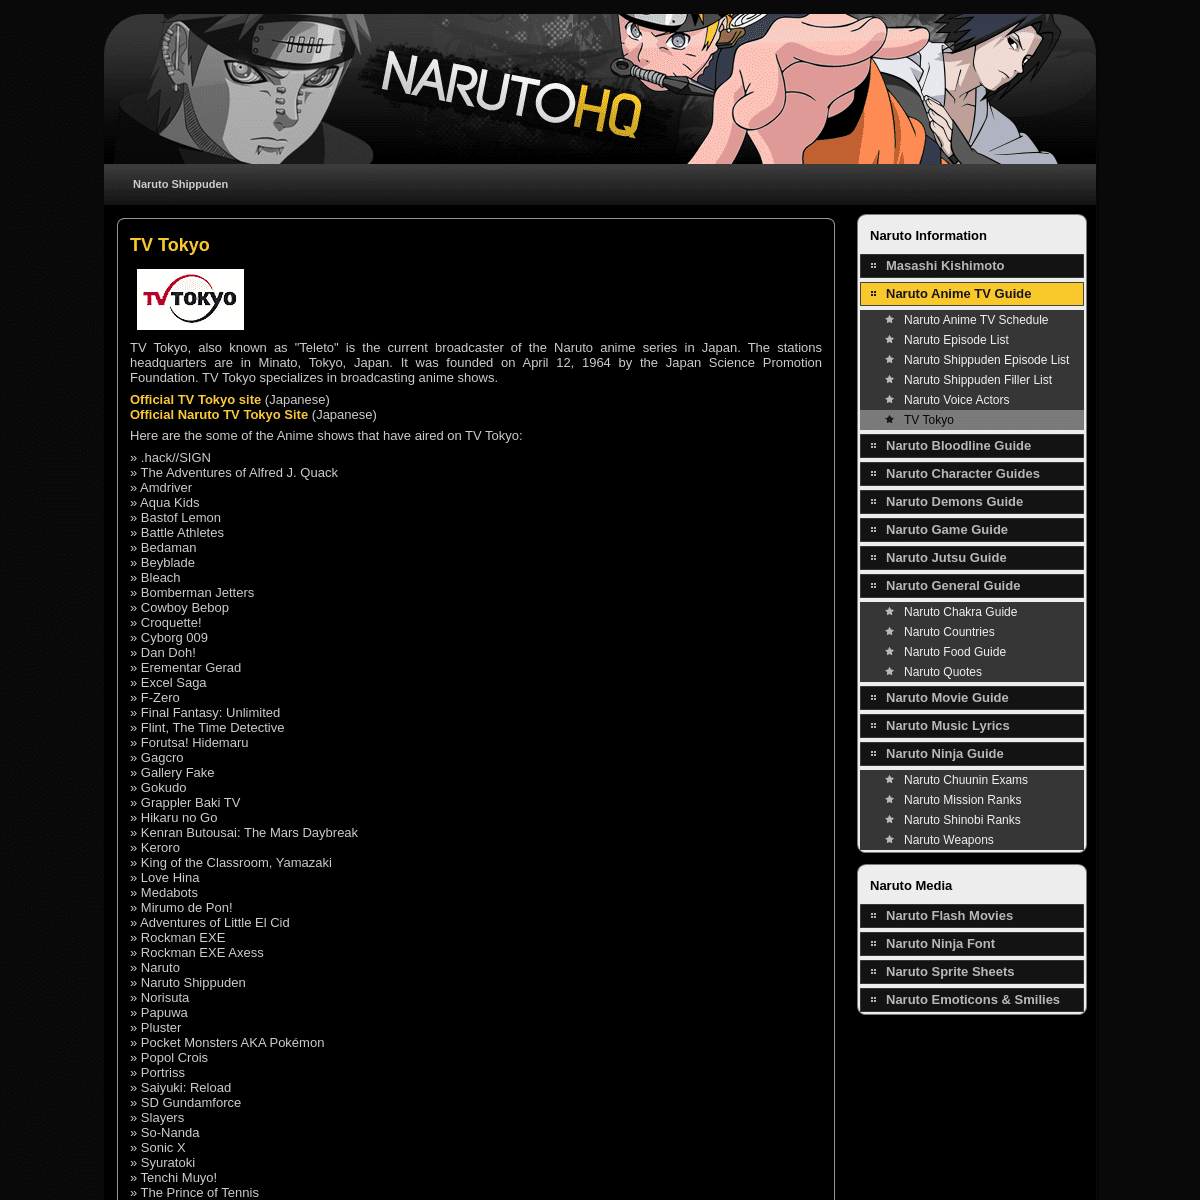 A complete backup of https://www.narutohq.com/tvtokyo.php